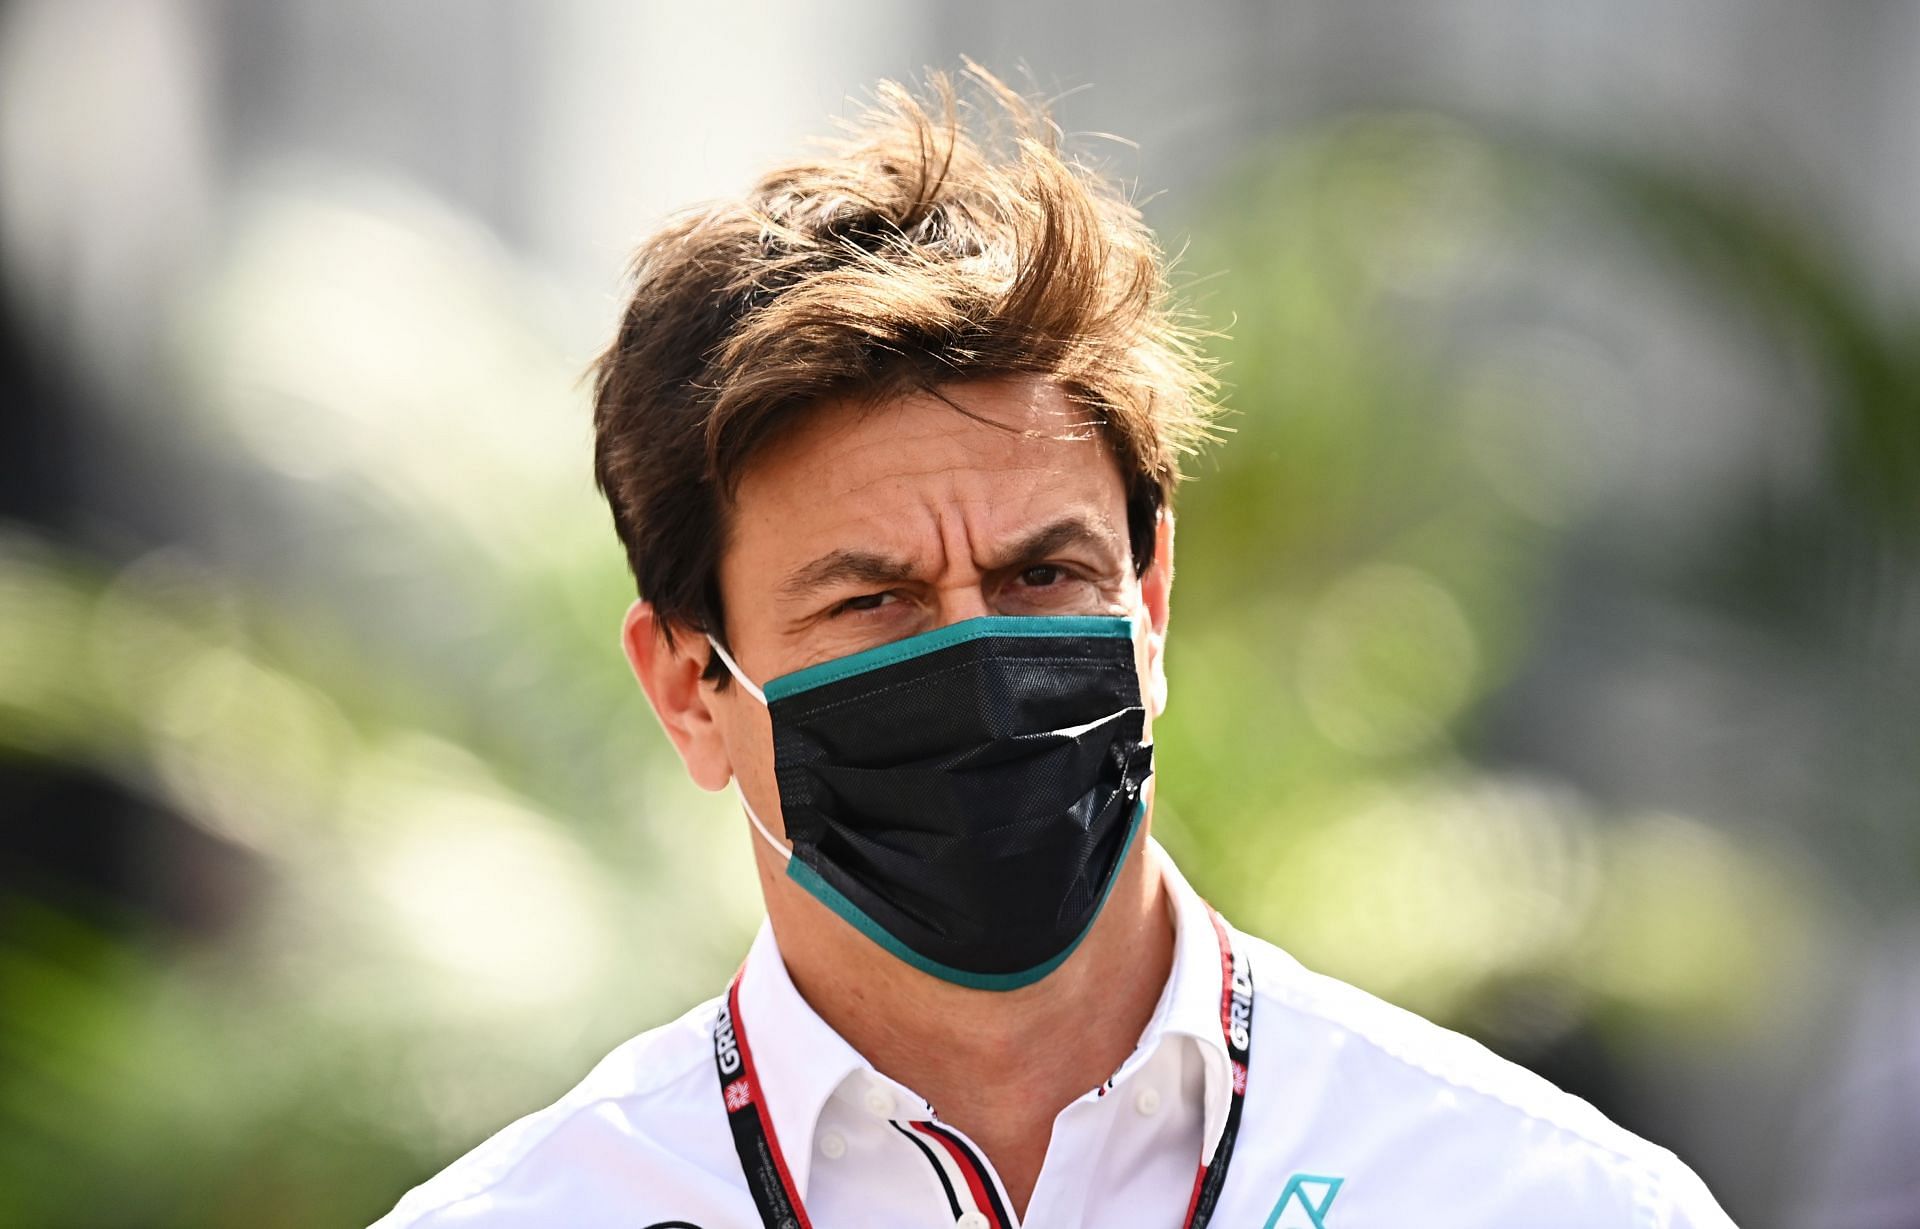 Toto Wolff walks in the F1 paddock. (Photo by Clive Mason/Getty Images)